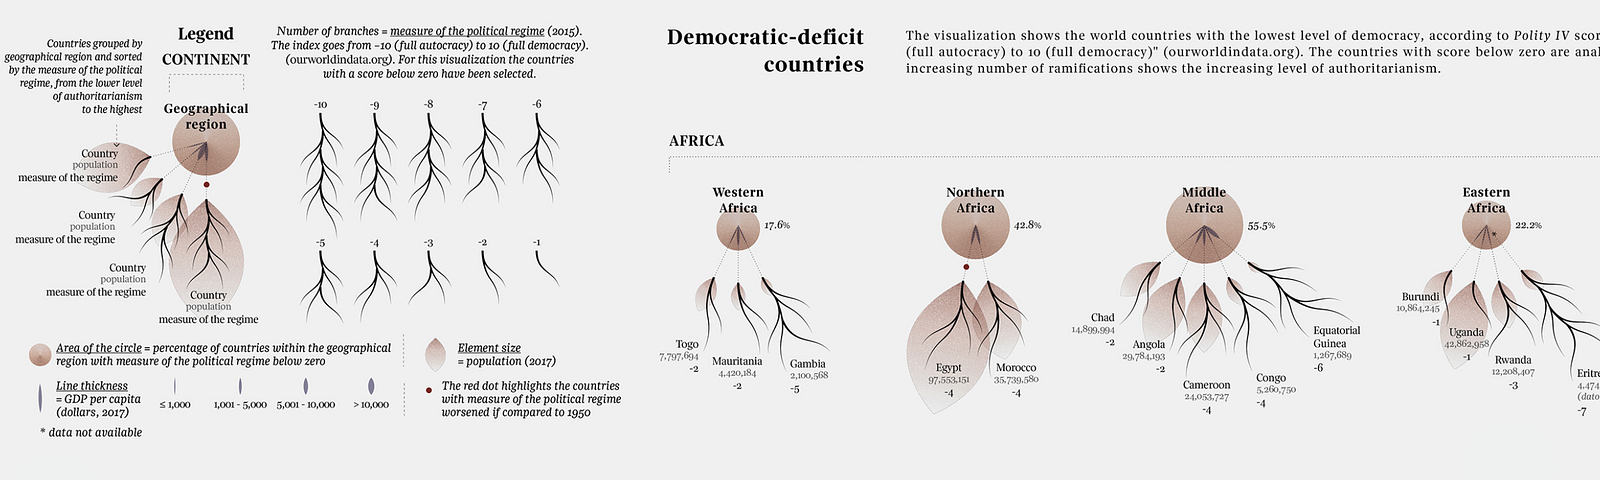 Continents are represented by reversed trees with the root—a brown circle—above the rest, and under it each country in this continent. The number of branches will correspond to the “democratic-deficit” grade of a country (from -1 to -10).